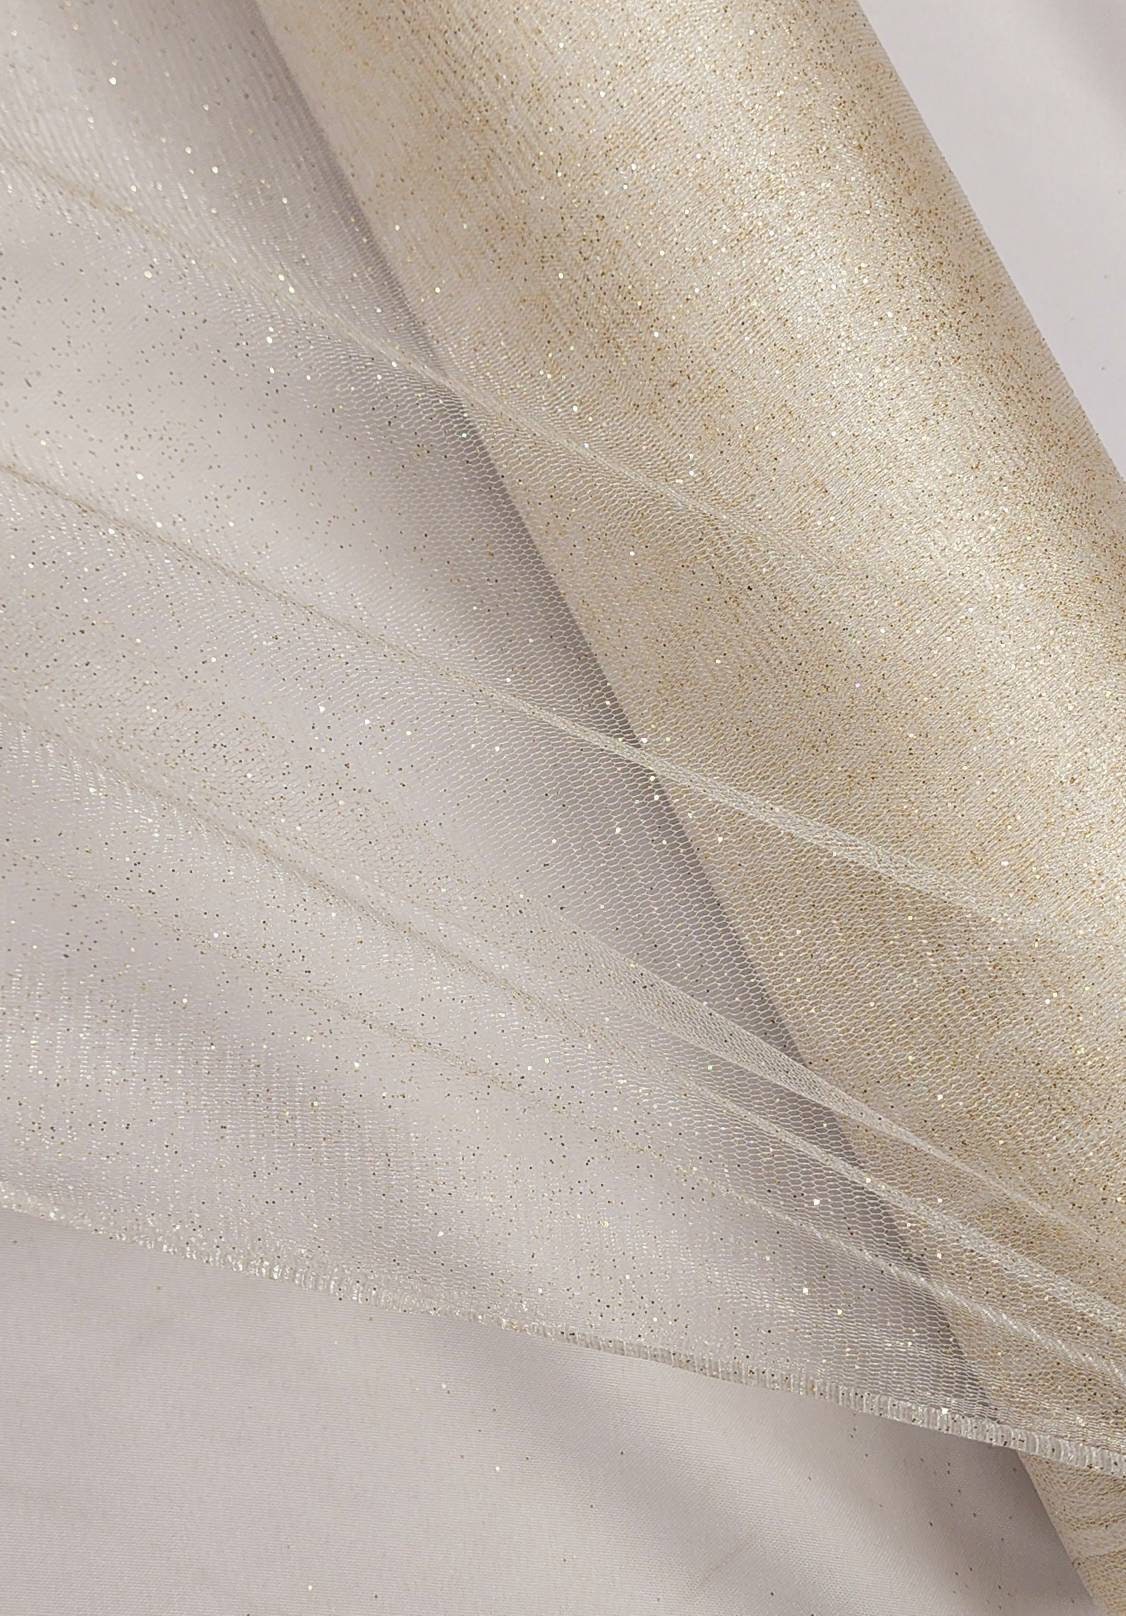 Gold Tulle Metallic Tulle Mesh, Christmas Tablecloth Tutus Skirts Garters  Millinery Hat Party Decoration 150cm 60 -  Sweden